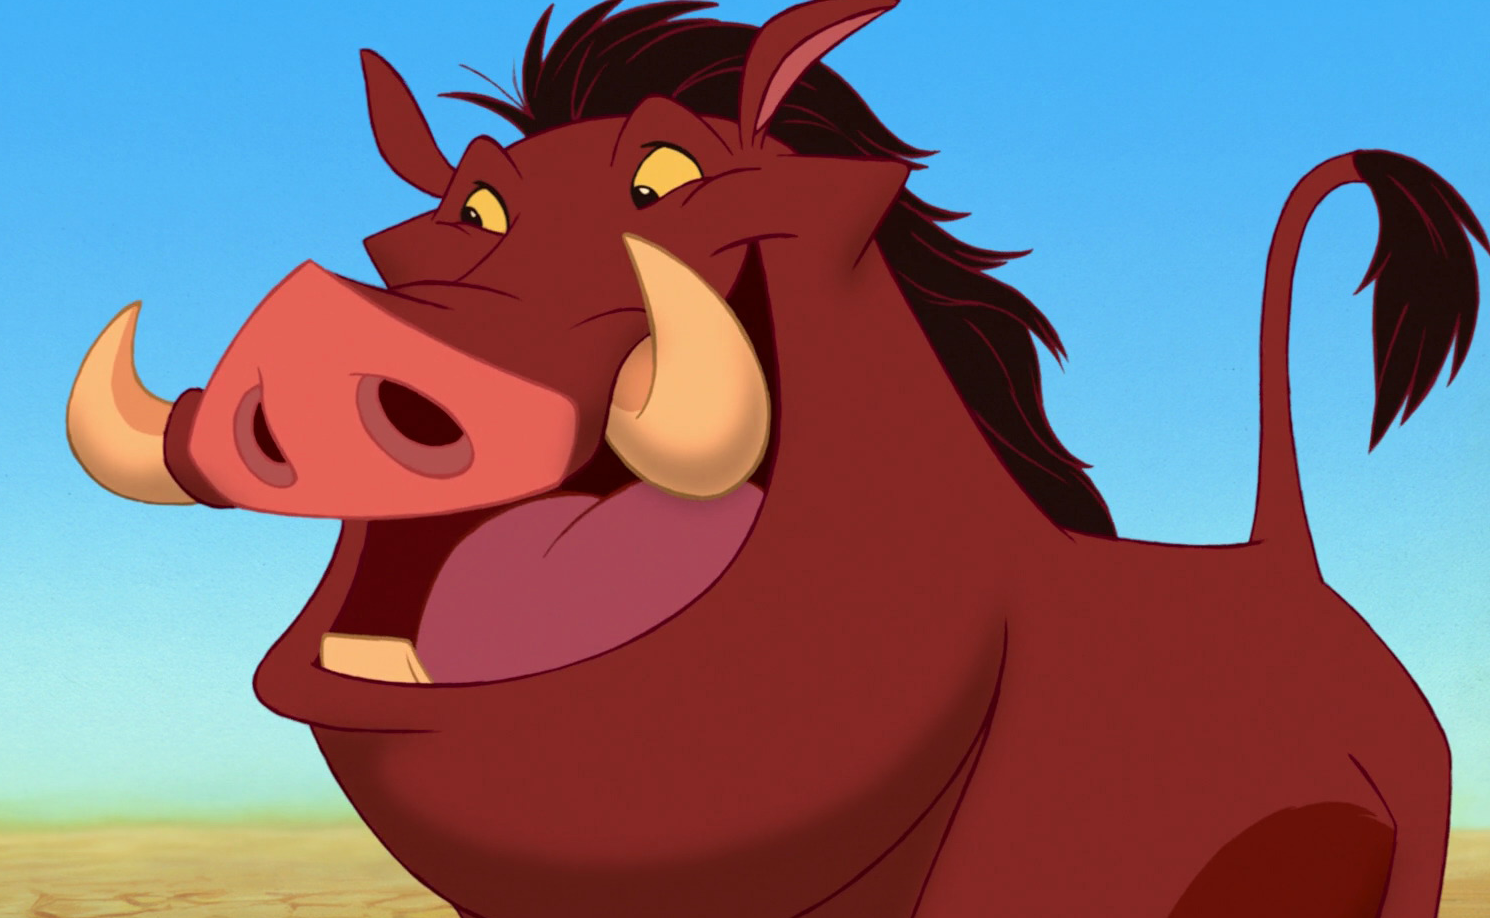 The character Pumbaa, a cartoon warthog from the Disney movie The Lion King, smiling.